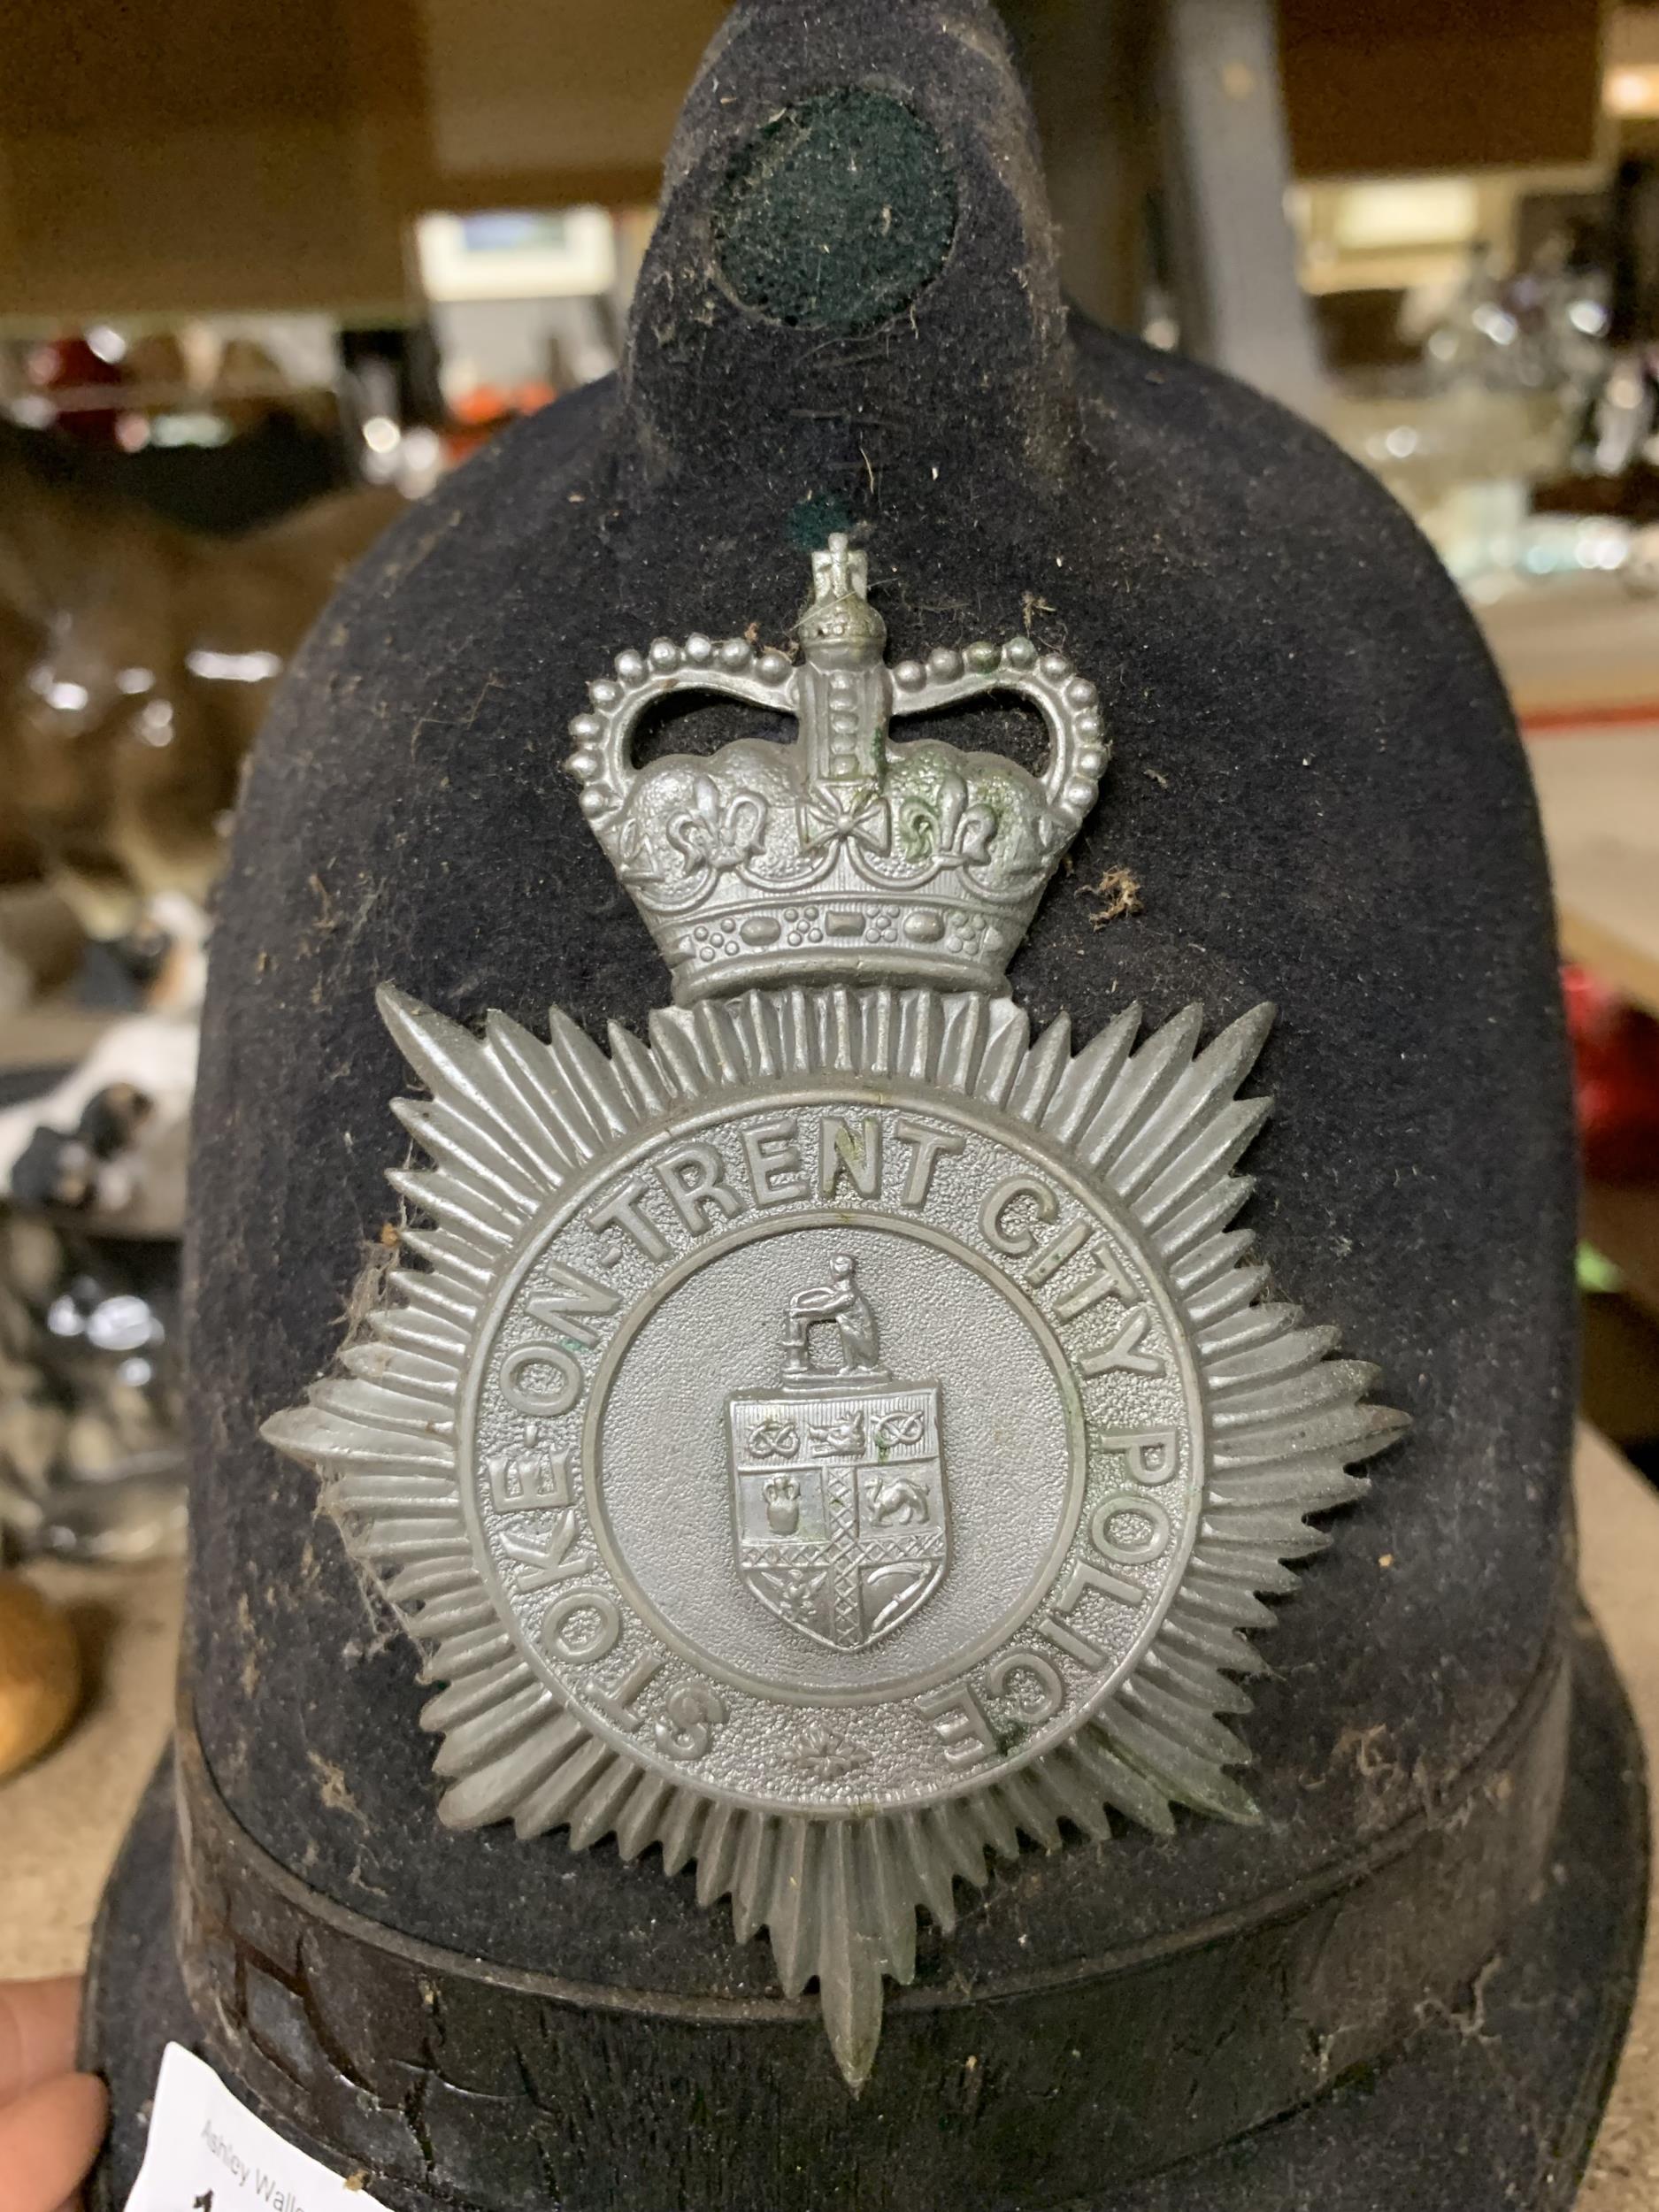 A VINTAGE STOKE ON TRENT CITY POLICE HELMET WITH PLATE - Image 2 of 3